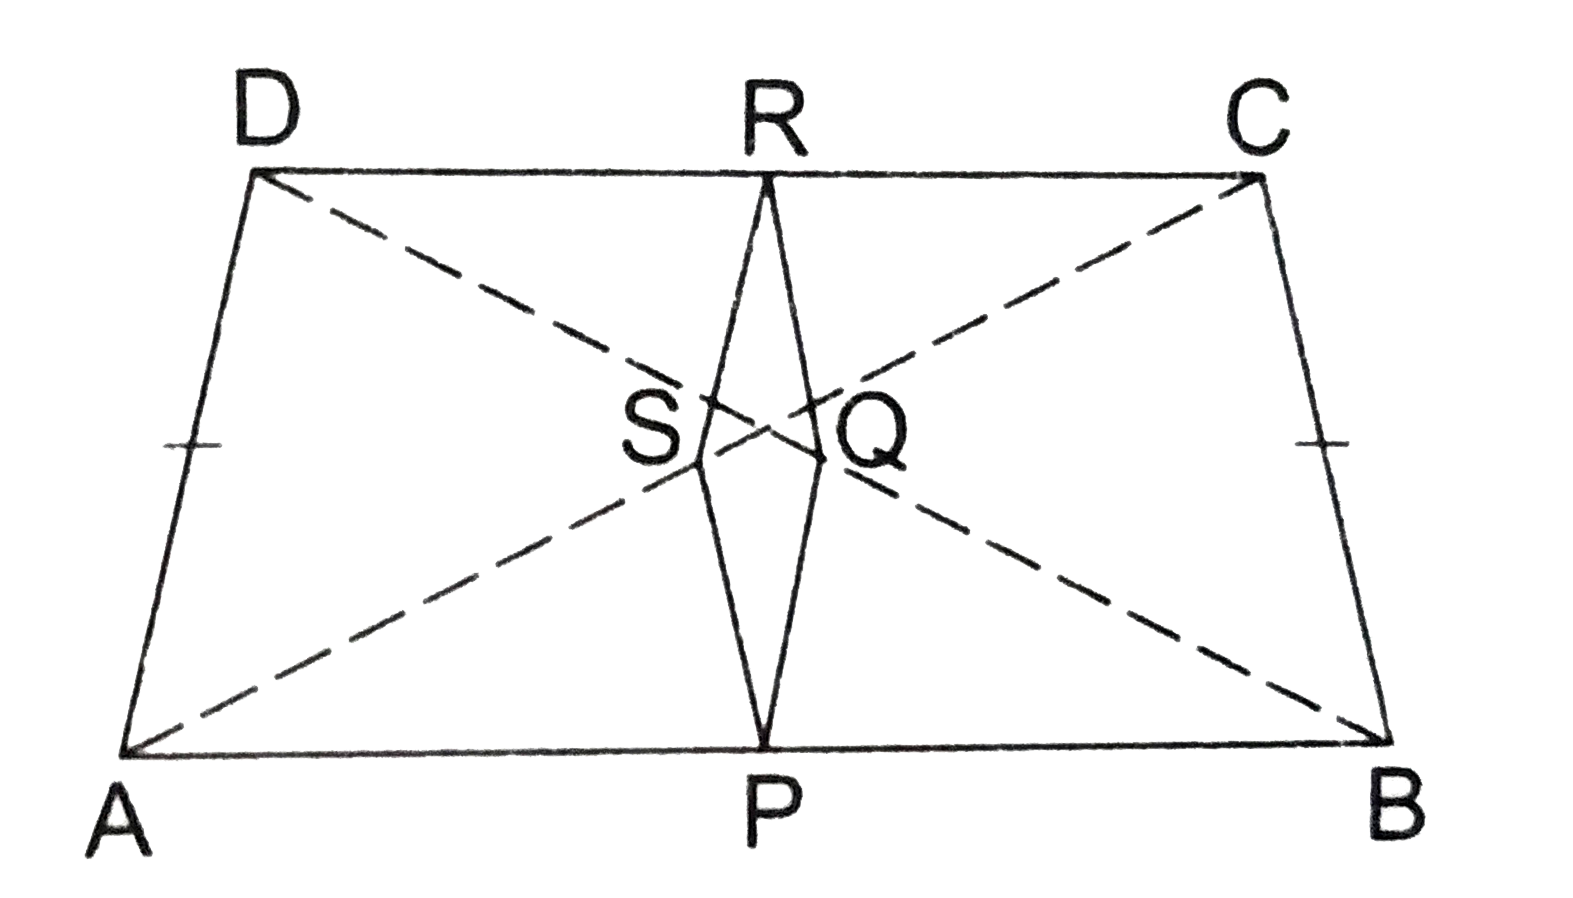 In the adjoining figure, ABCD is a trapezium in which AB||DC and AD = BC. If P, Q, R, S be respectively the midpoints of BA, BD, CD, CA then show that PQRS is a rhombus.